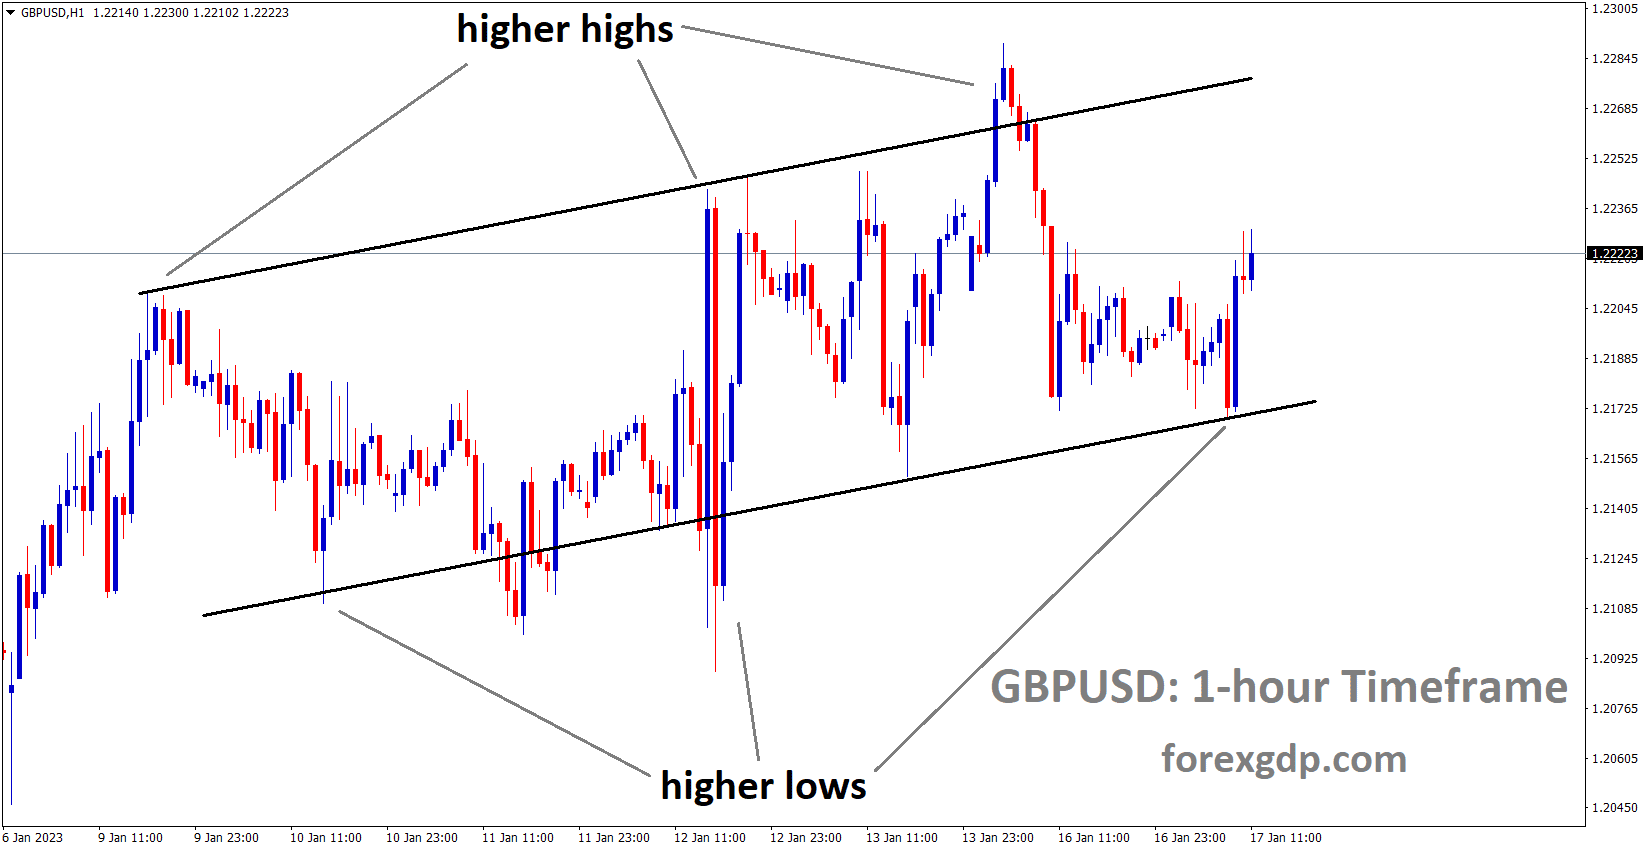 GBPUSD is moving in an Ascending channel and the market has rebounded from the higher low area of the channel 1